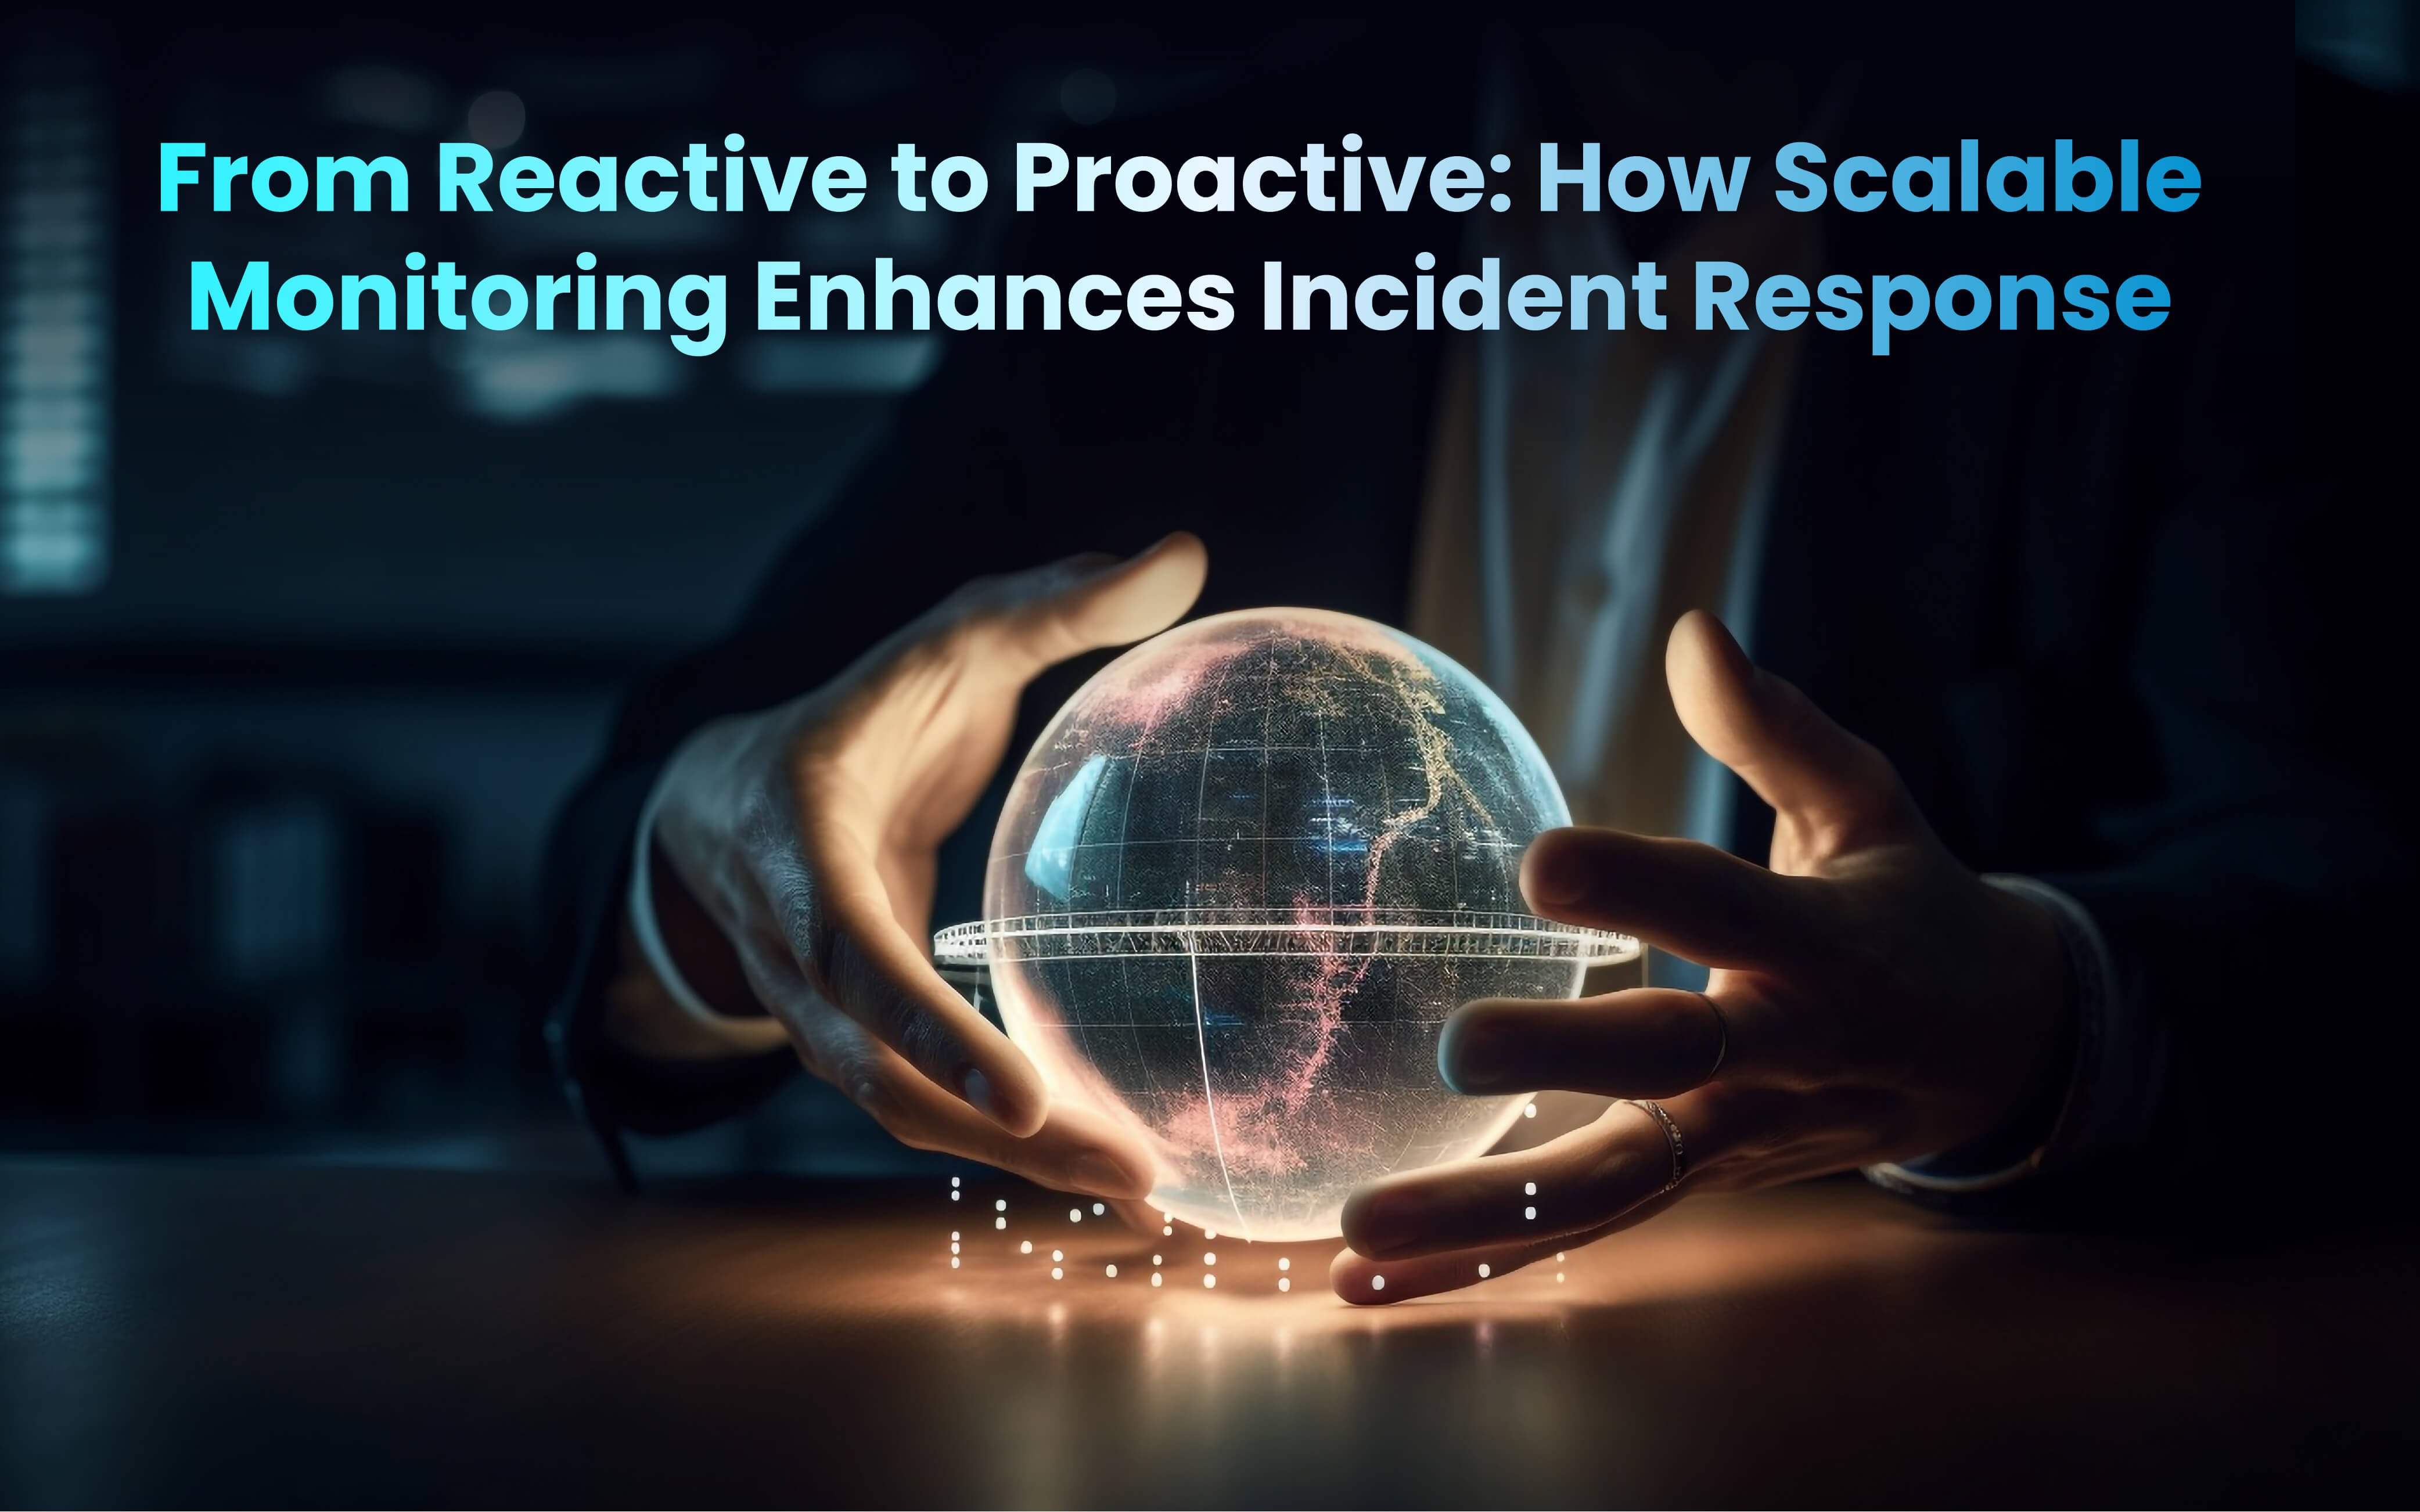 From Reactive to Proactive: How Scalable Monitoring Enhances Incident Response